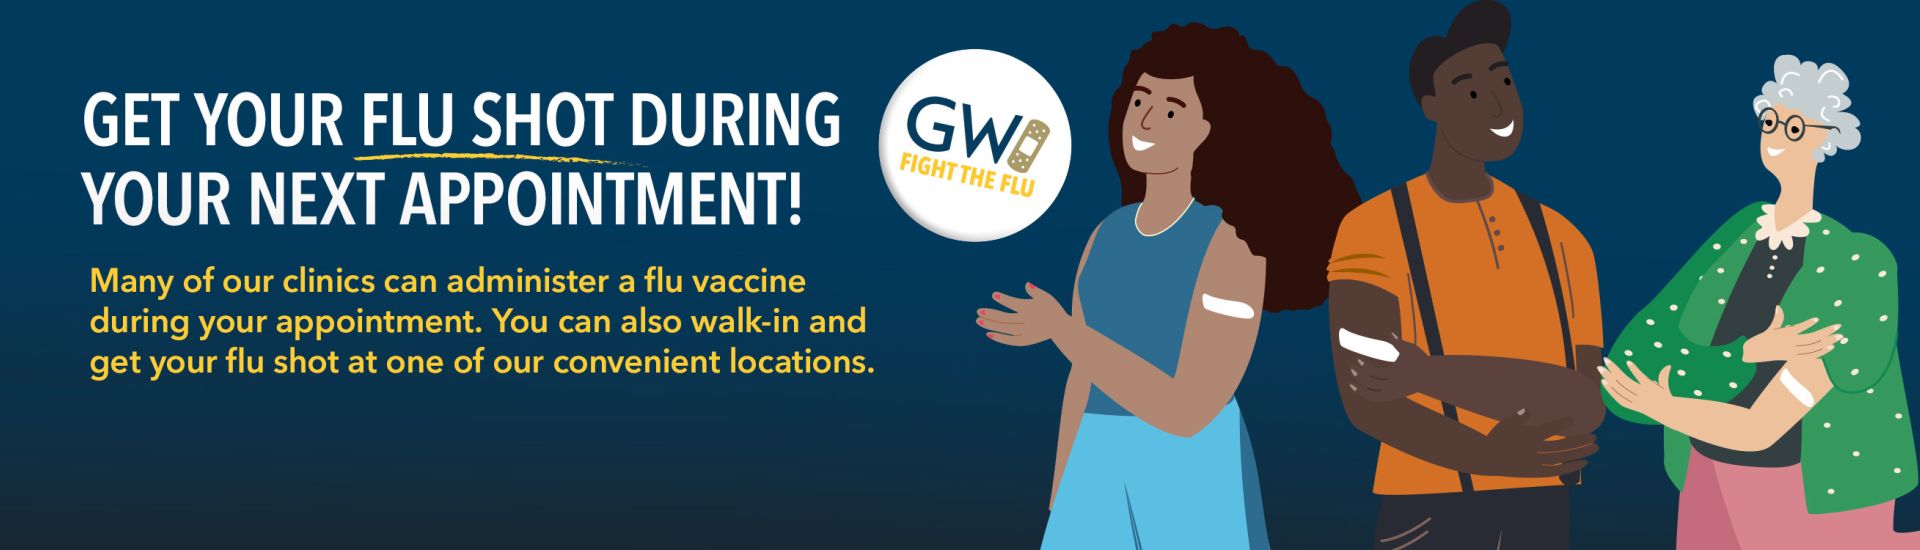 Get your flu shot during your next appointment. Many of our clinics can administer a flu vaccine during your appointment. You can also walk in and get your flu shot at one of our convenient locations.